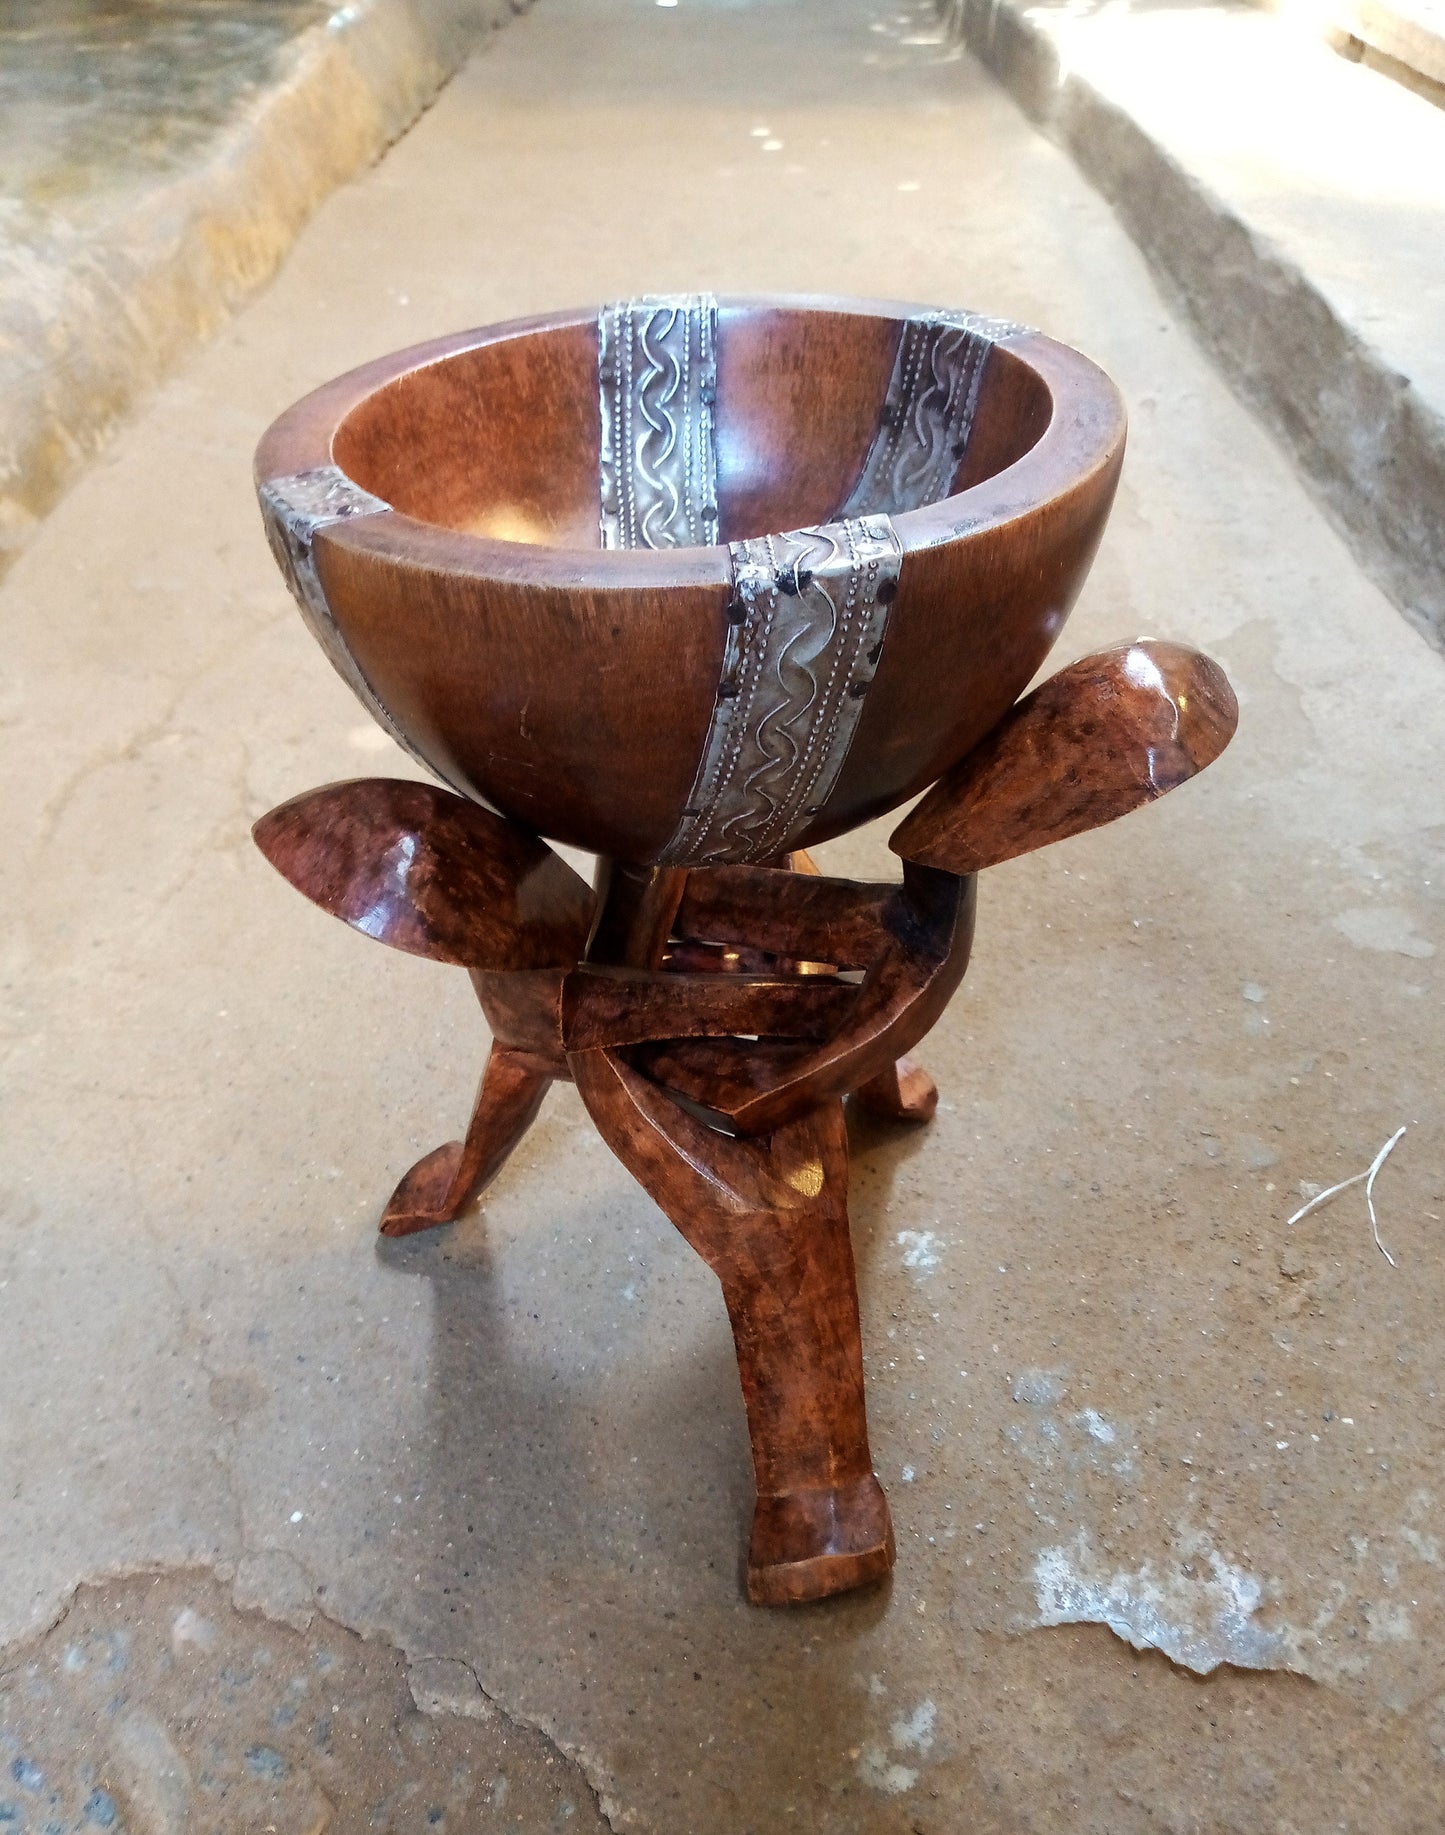 African Carved Wood Foldable Stand Bowl